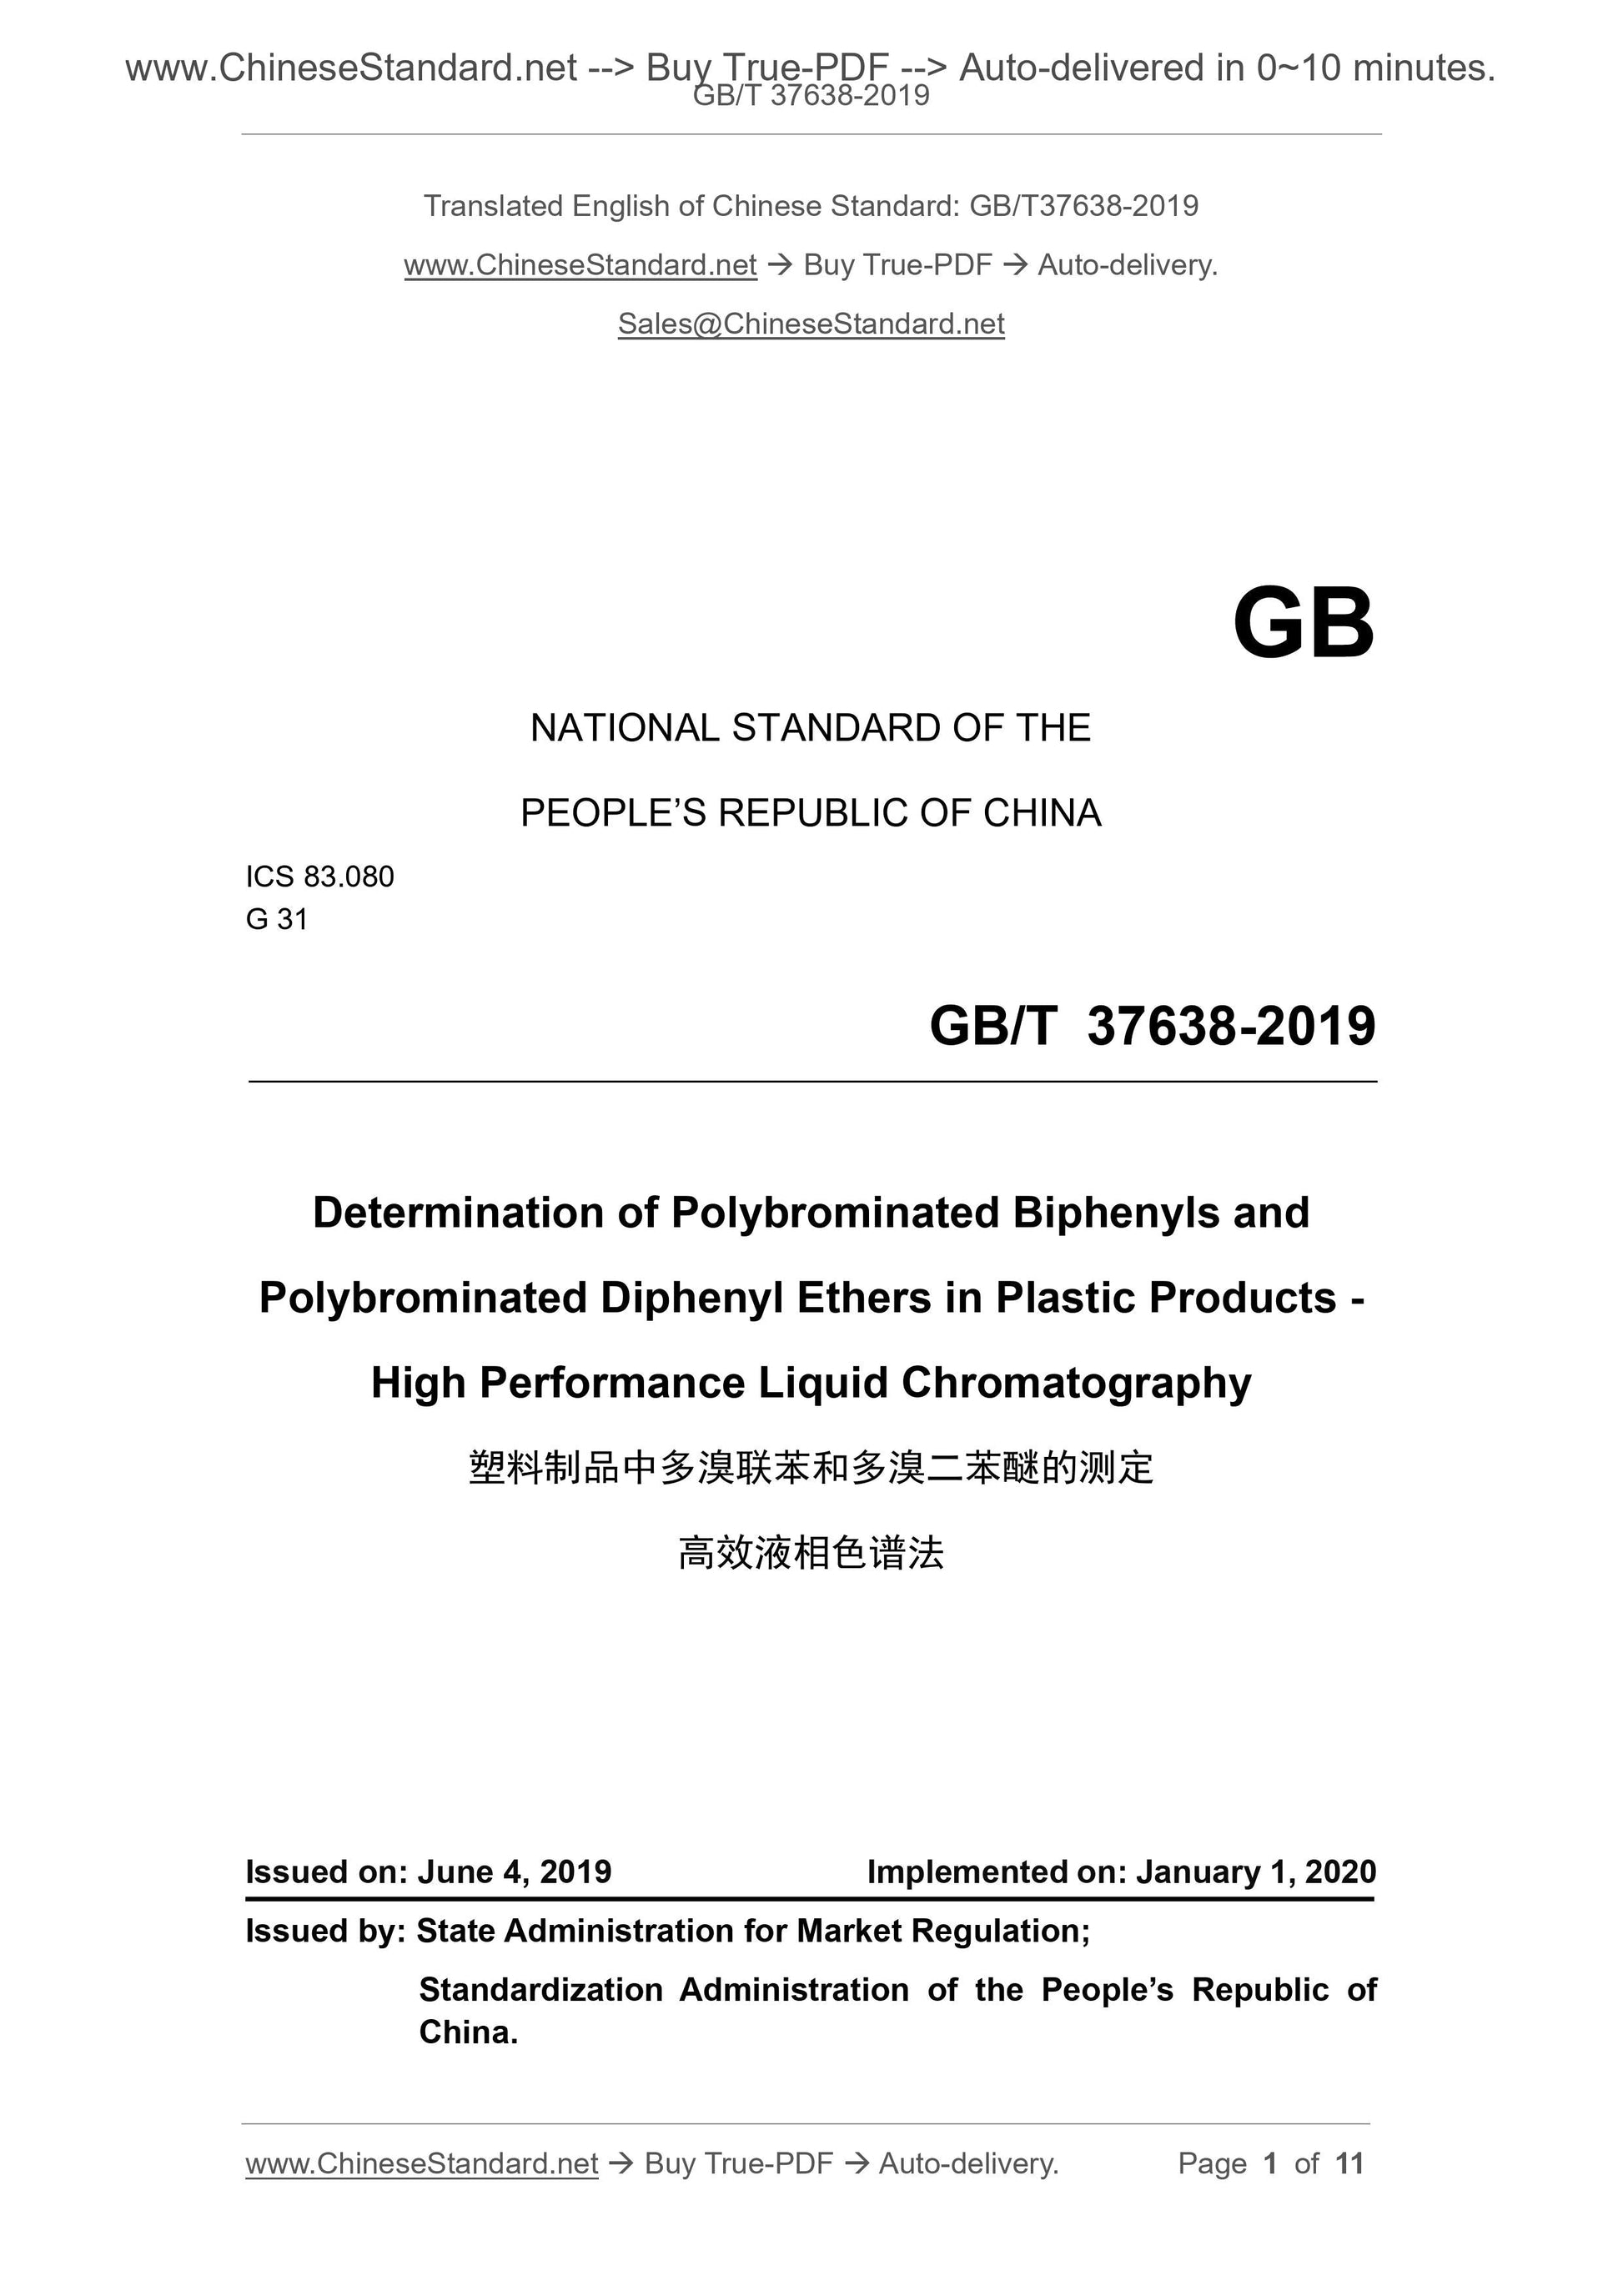 GB/T 37638-2019 Page 1